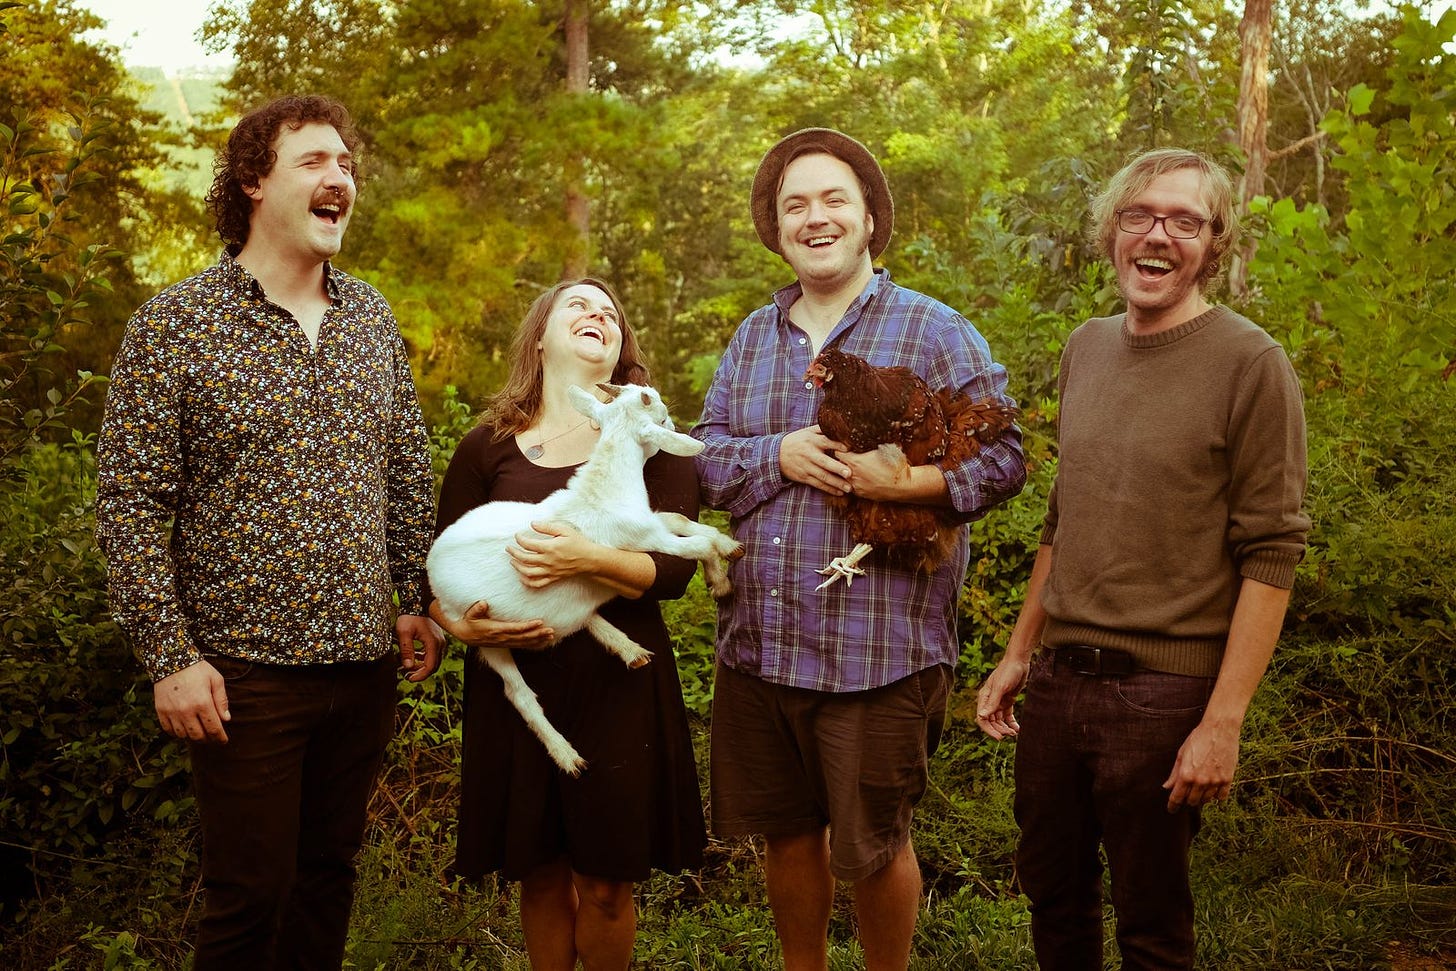 Four people stand in a forest setting. From left to right, there is a white man wearing a tightly patterned floral shirt. His eyes are nearly closed and he is laughing, and he has curly brown hair and a mustache. Next is a young woman, laughing, holding her head back, holding a white goat. She is wearing a burgundy dress and has light brown hair. Next is a man with a blue flannel shirt, wearing a brown hat, holding a brown chicken. He is smiling, eyes off the camera. Second is a white man wearing a brown sweater with the sleeves rolled up. He has blonde hair and is wearing glasses, looking directly at the camera. This is their label promo photo.